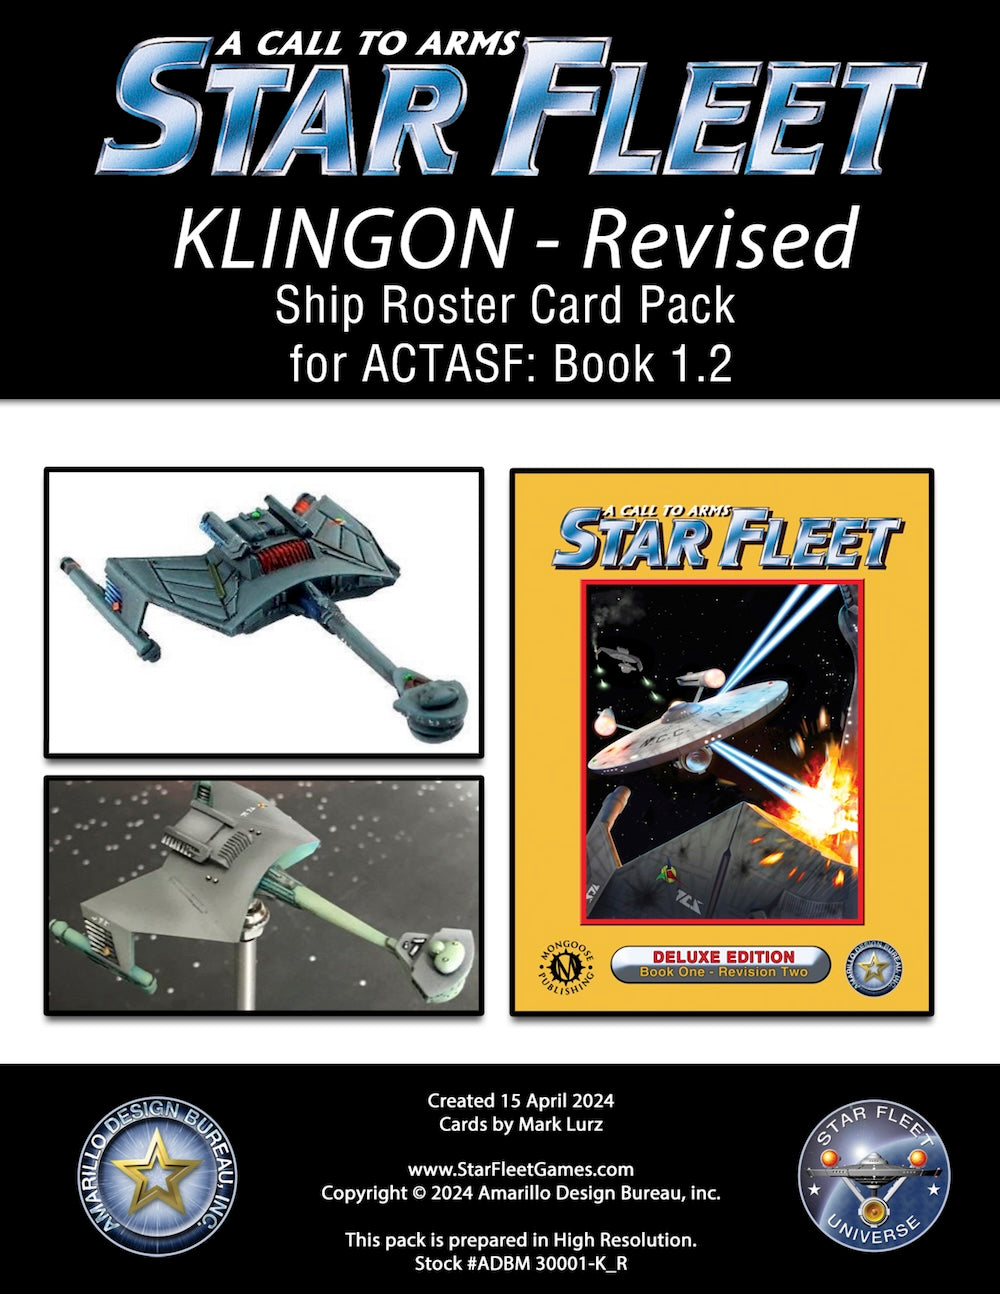 A Call to Arms: Star Fleet, Book 1.2: Klingon Ship Roster Card Pack Revised